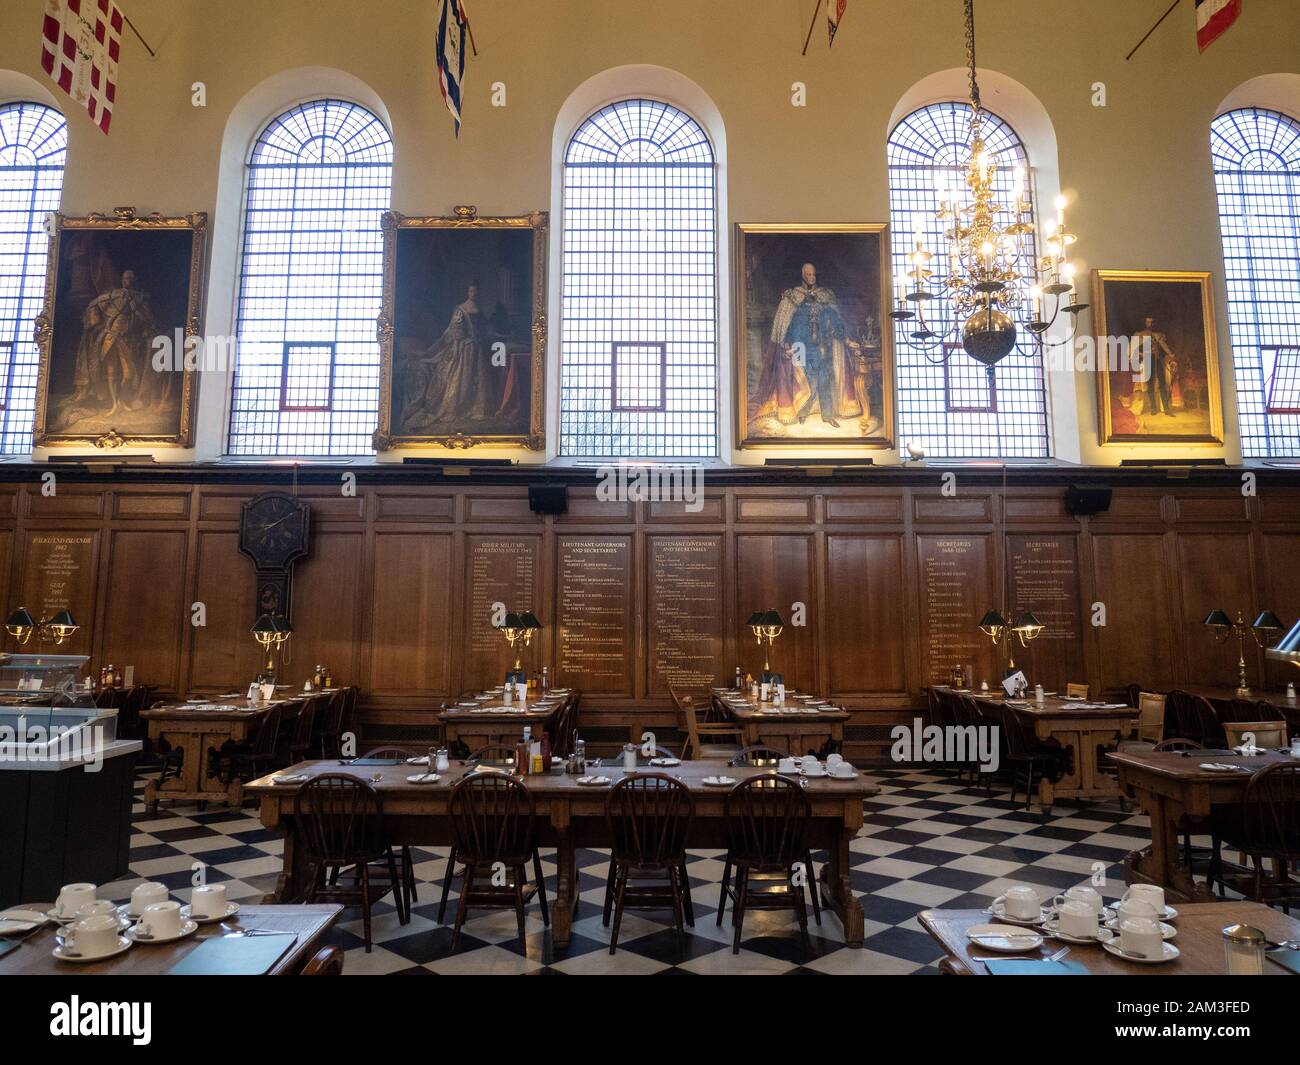 Dining hall at the Royal Hospital Chelsea, a retirement/nursing home for British Army veterans. Chelsea, London. Stock Photo